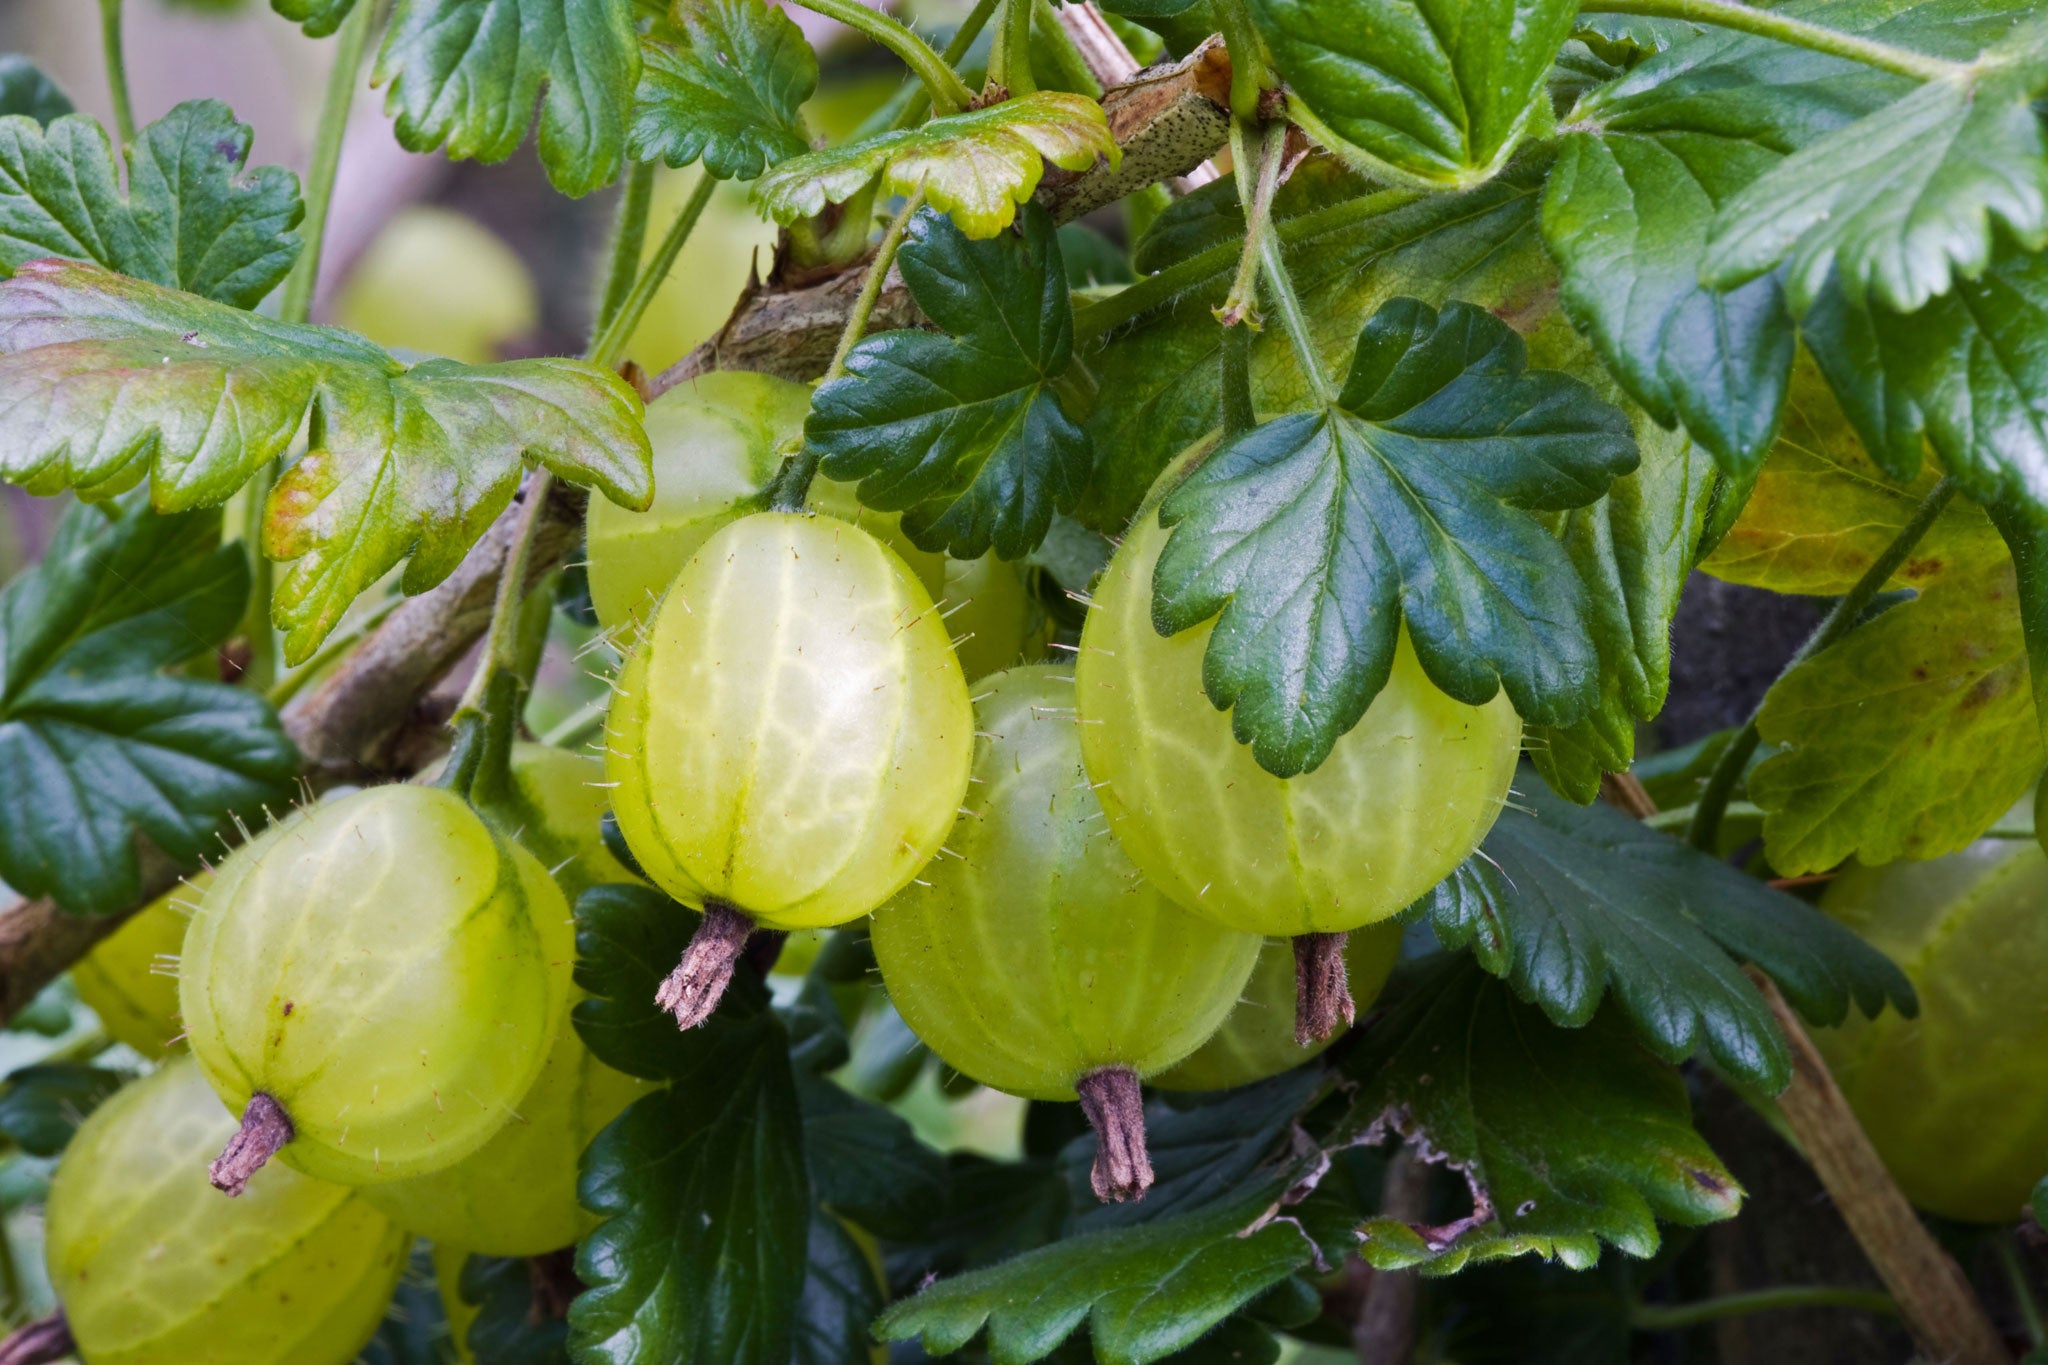 Growing gooseberries is relatively simple: they are self-fertile, so one plant will do